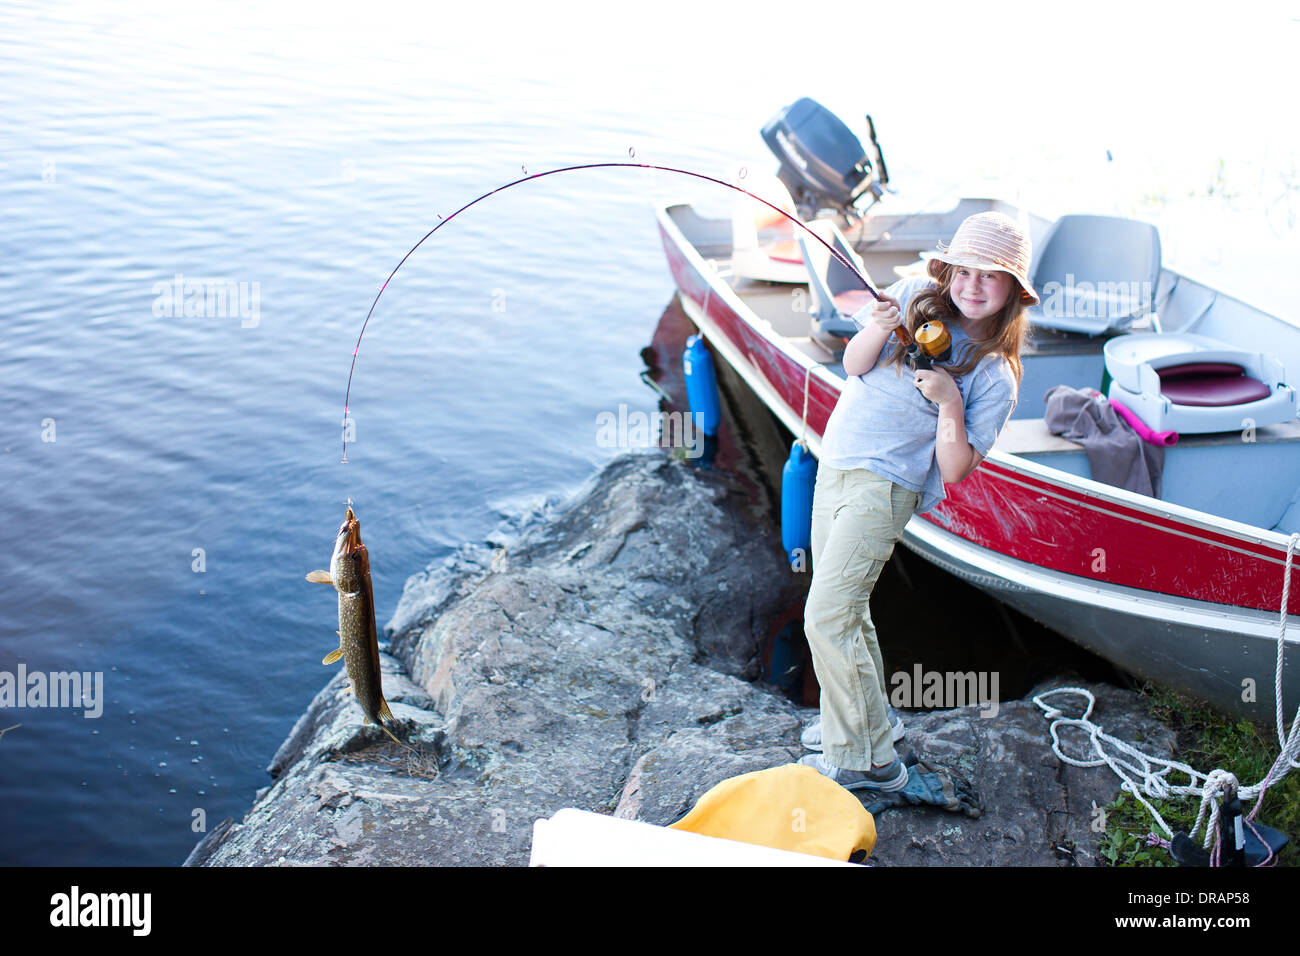 A little girl holds a fishing pole with a large fish on the end of